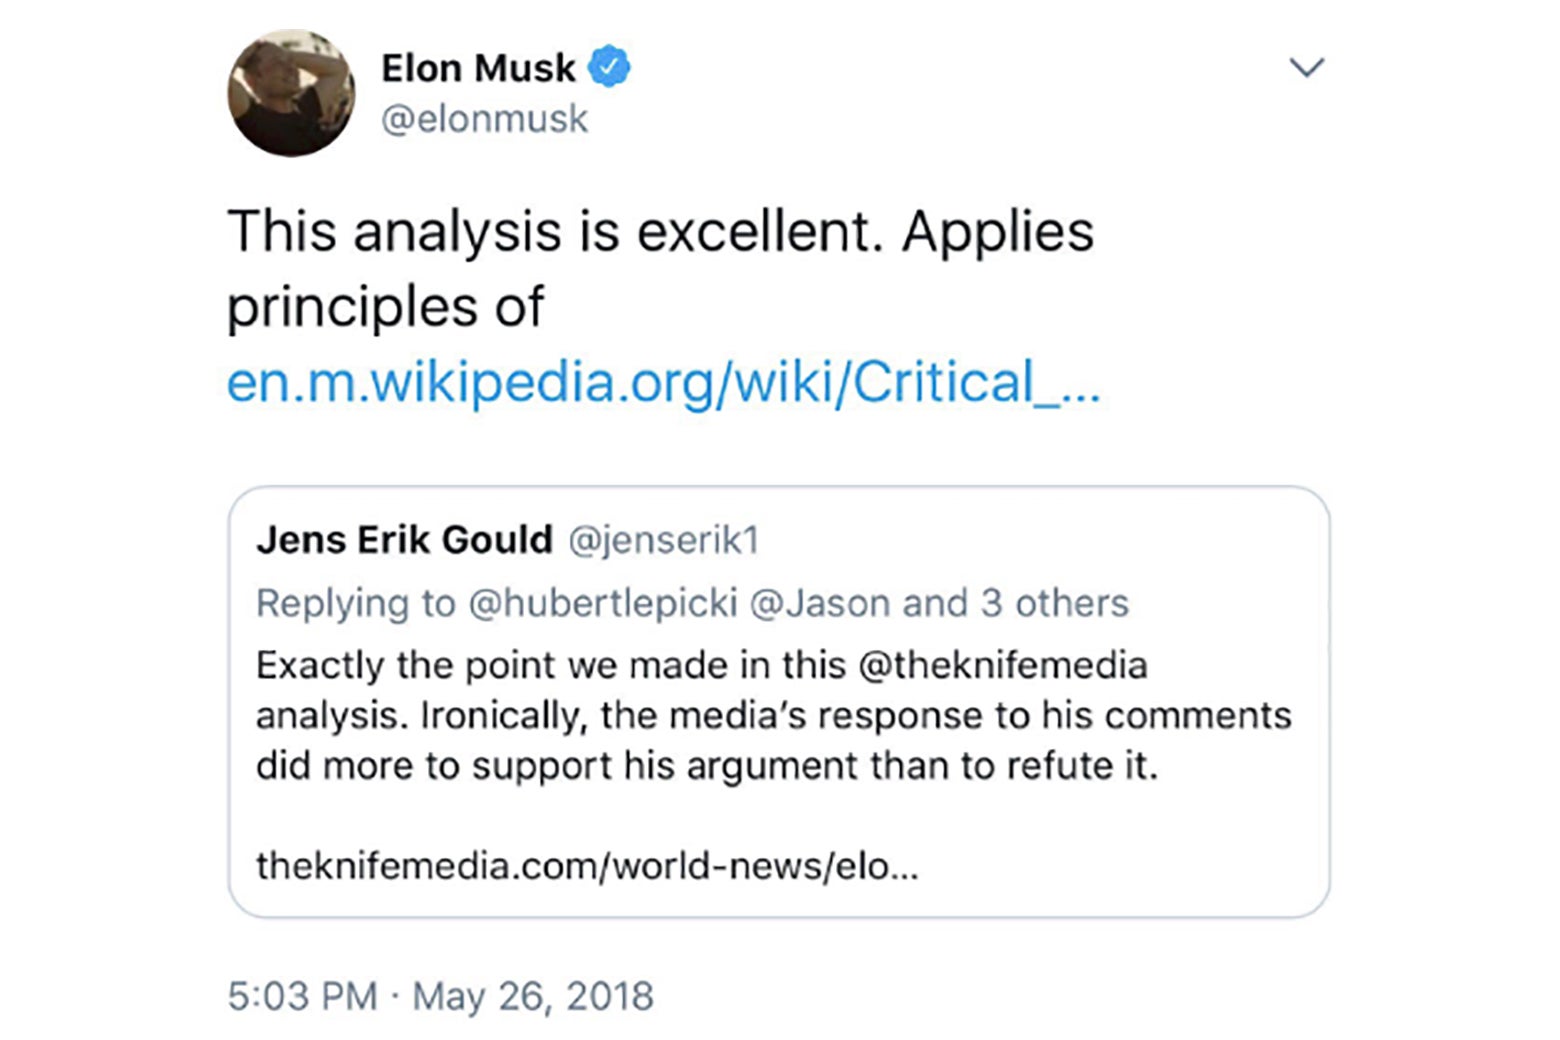 A deleted tweet from Elon Musk linking to an article on The Knife, reading “This analysis is excellent. Applies principles of https://en.wikipedia.org/wiki/Critical_thinking”.